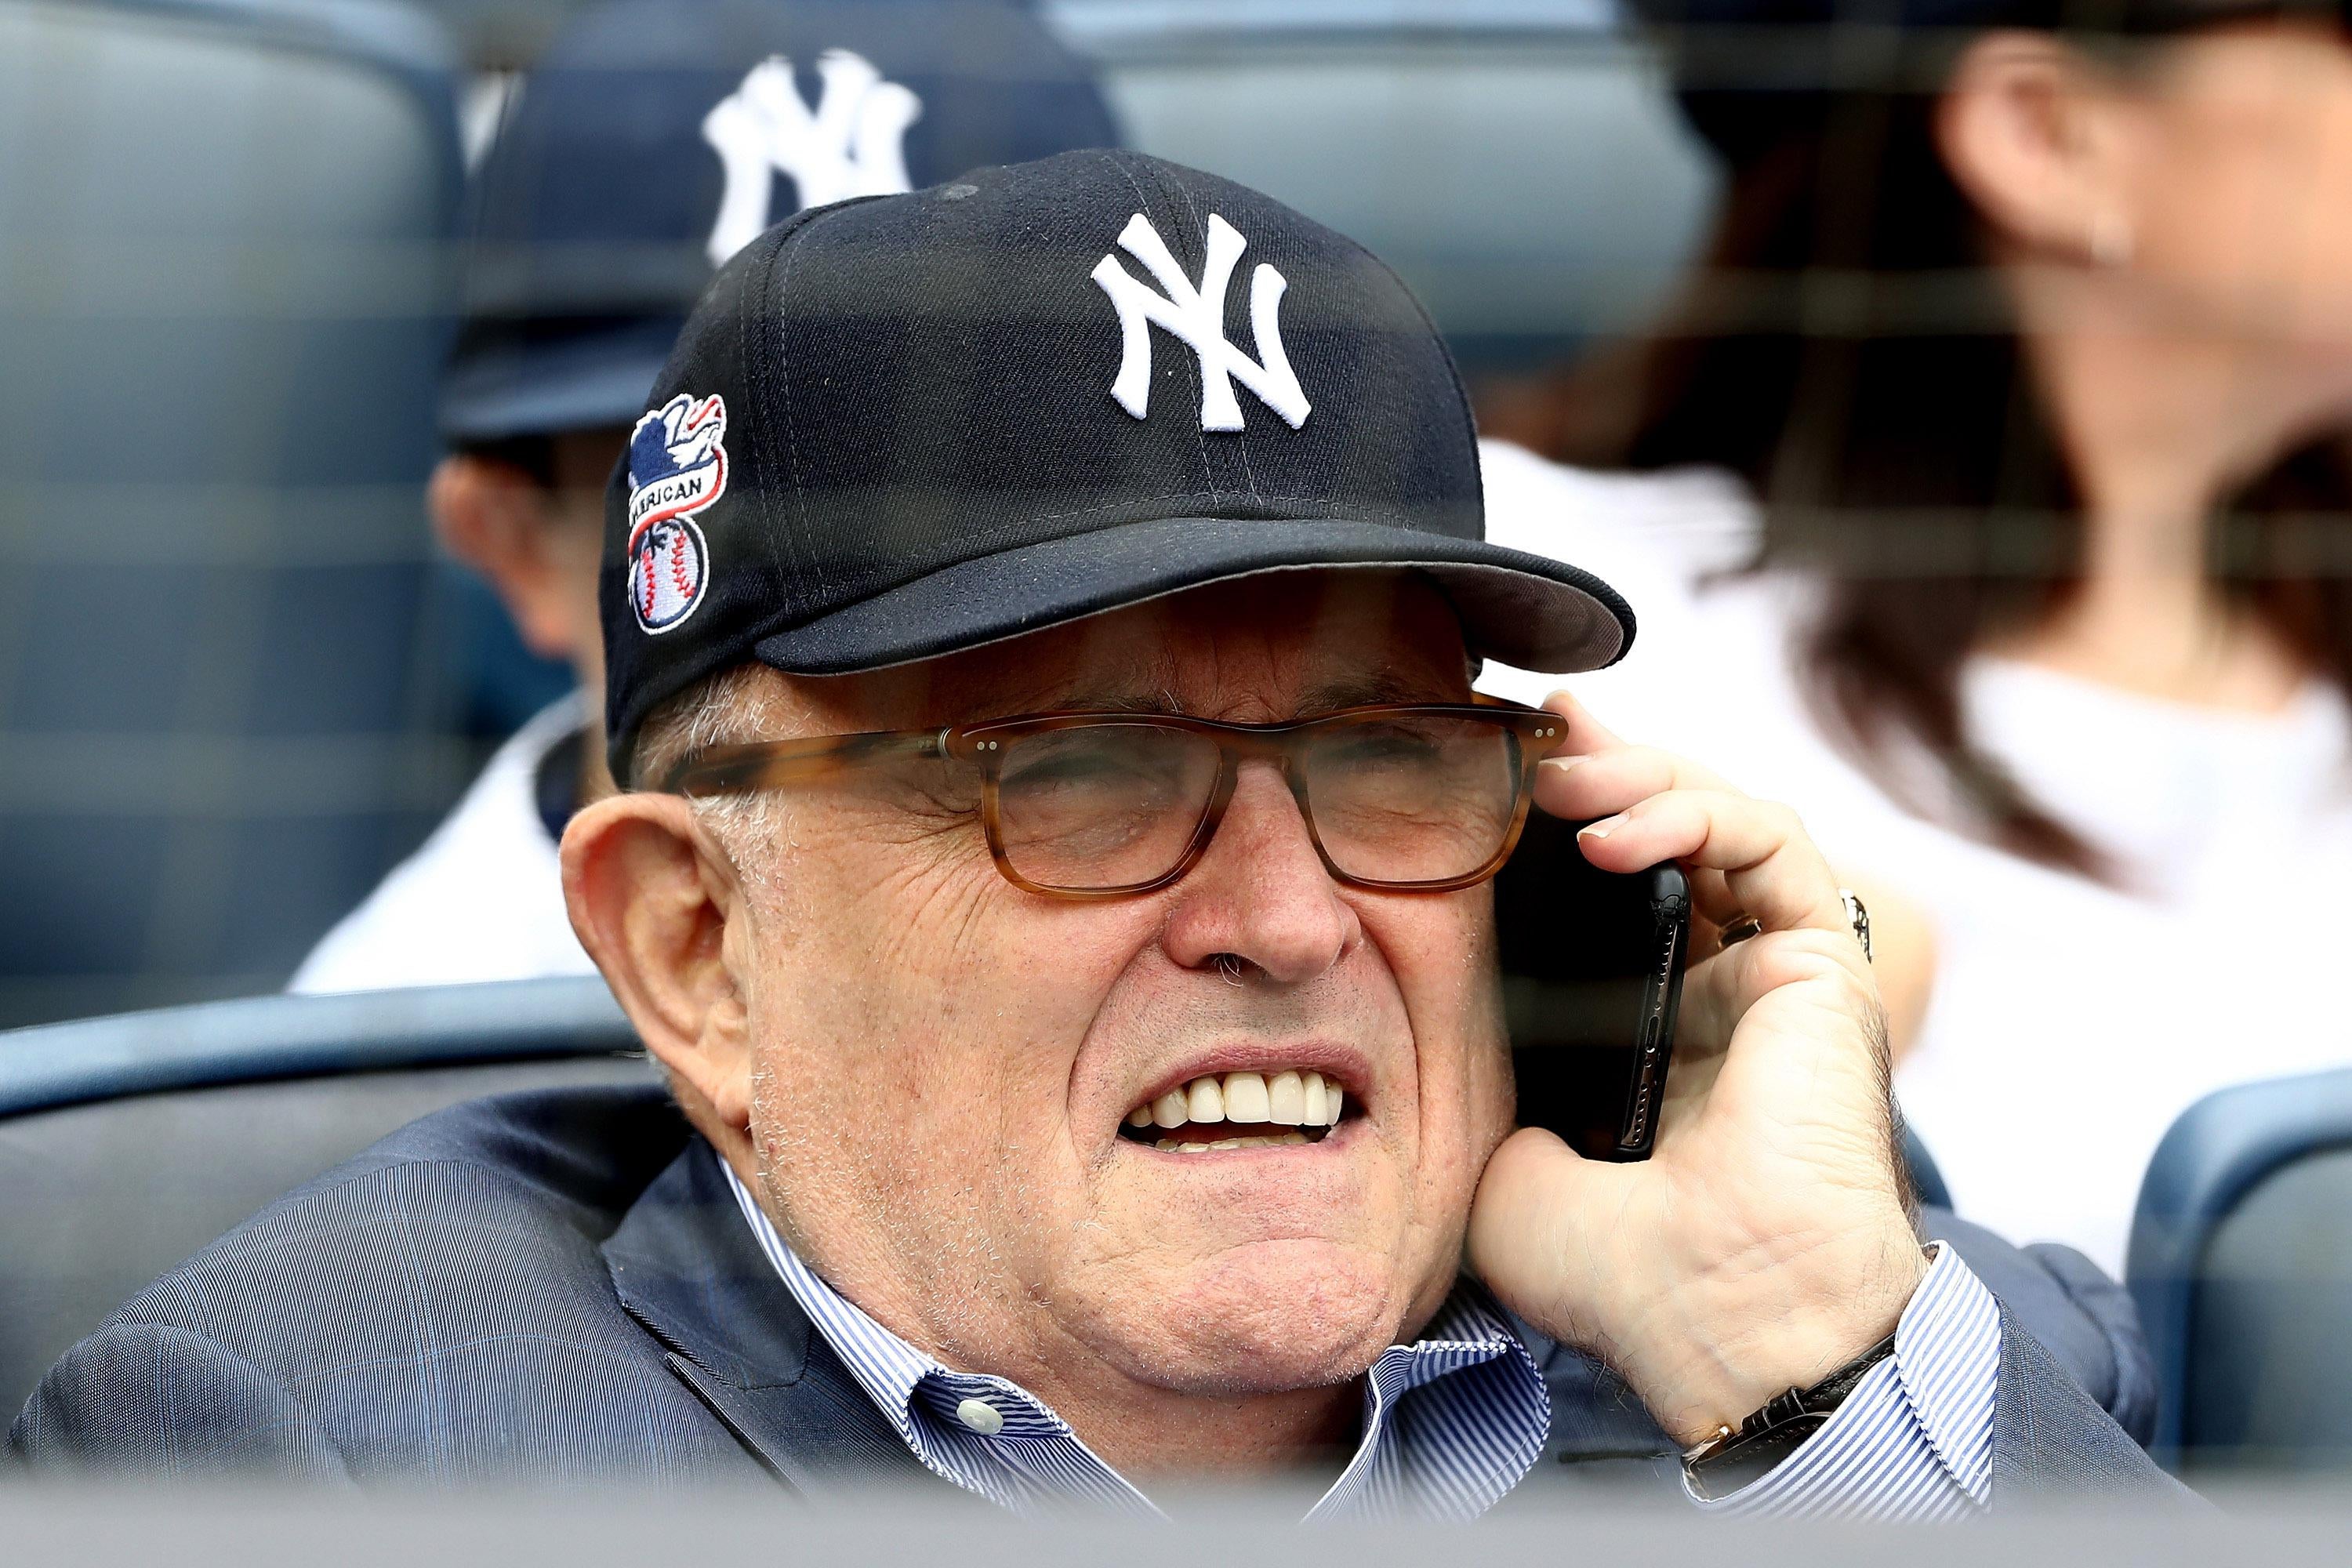 Rudy Giuliani, former New York City mayor and current lawyer for President Donald Trump, attends the game between the New York Yankees and the Houston Astros at Yankee Stadium on May 28, 2018 in the Bronx borough of New York City. 